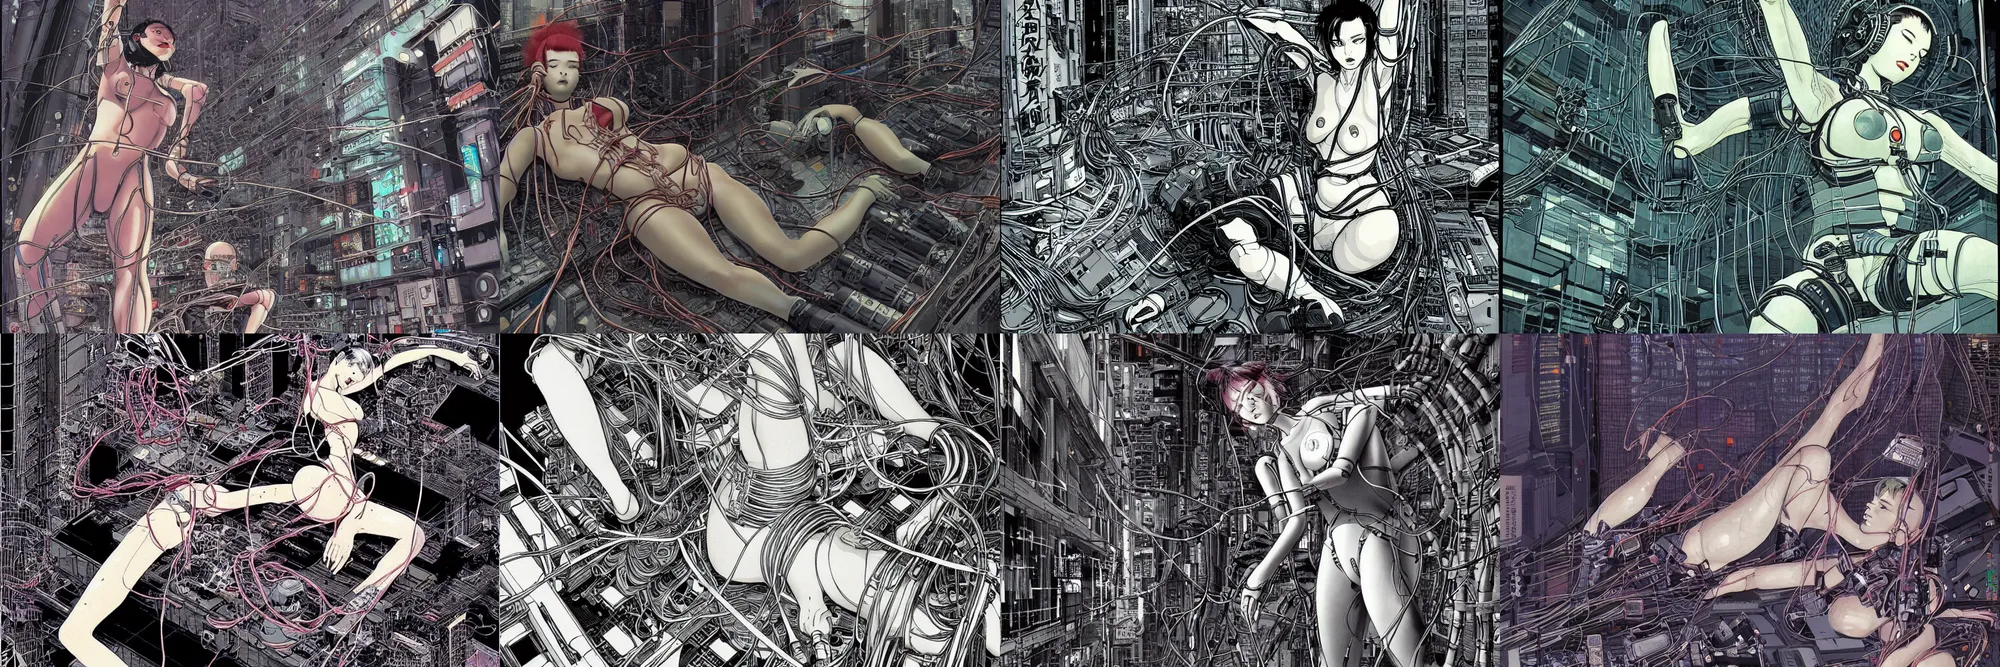 Prompt: an intricate, awe inspiring cyberpunk illustration of a female android body lying open on a labor floor, wires and cables coming out, by masamune shirow and katsuhiro otomo